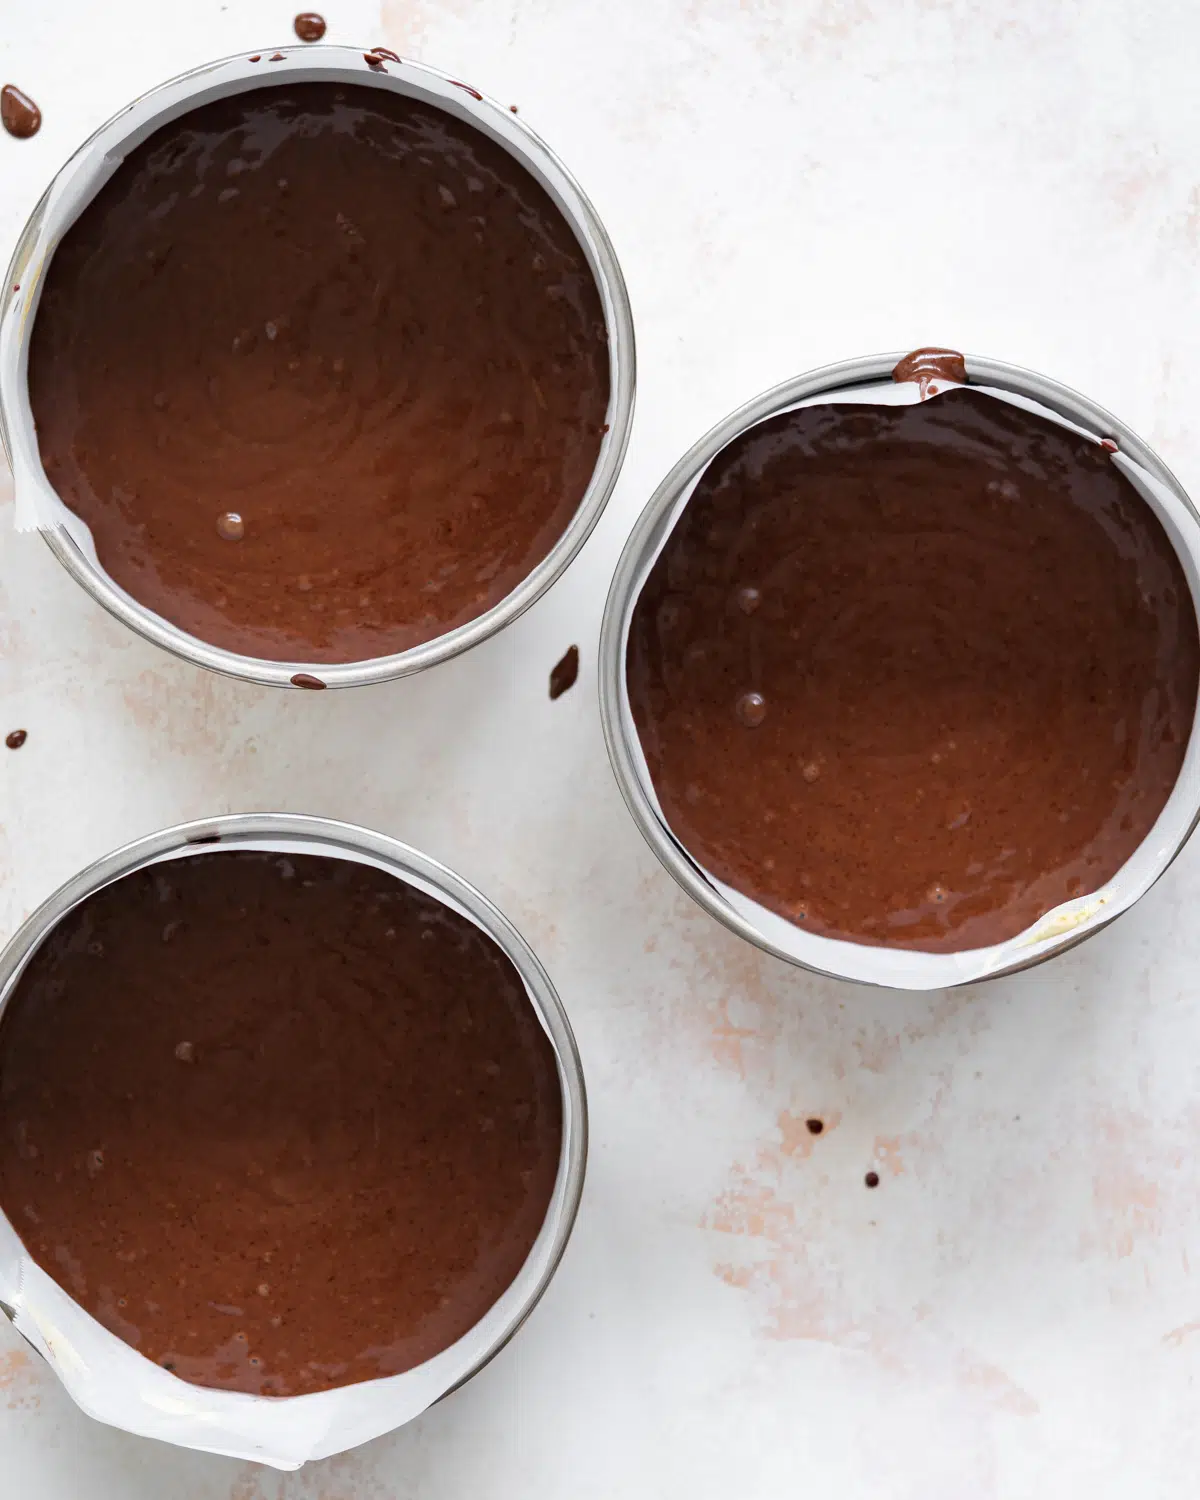 3 cake tins filled with chocolate cake batter,